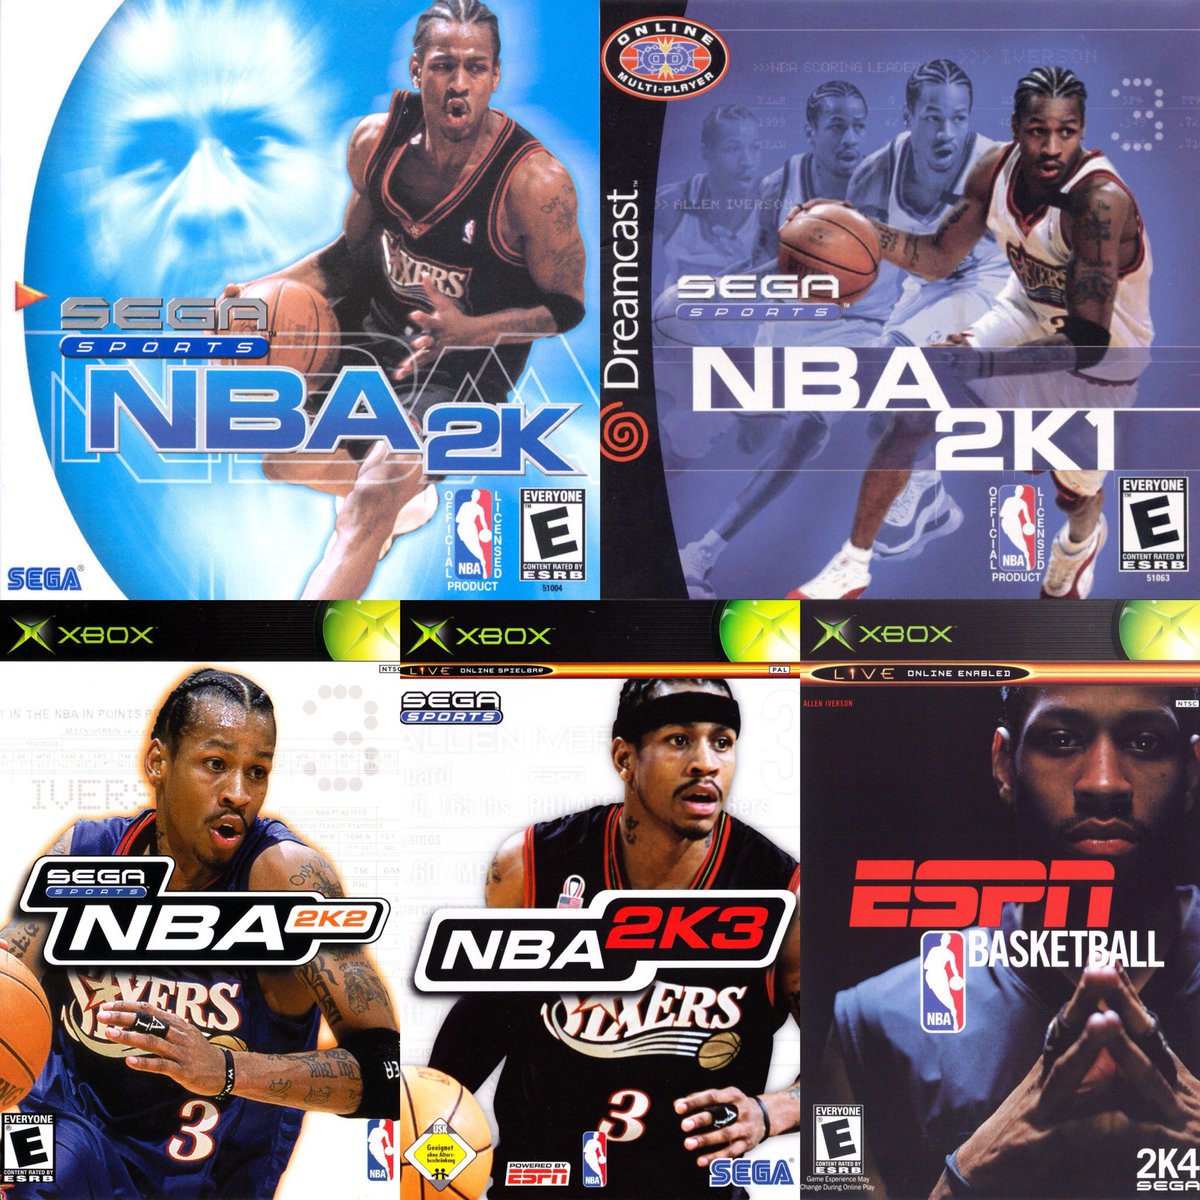 Allen Iverson can get the NBA 2K cover 